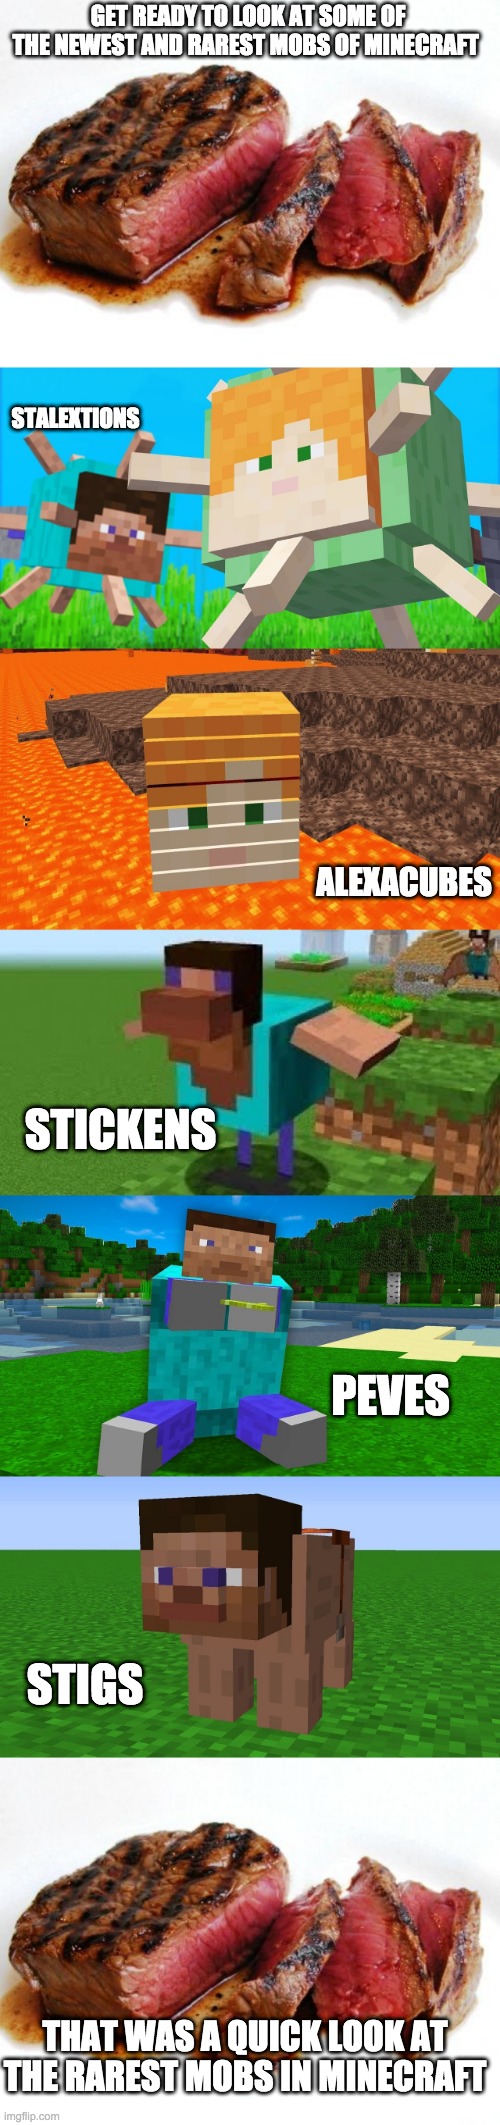 does anyone else get the steak pun? | GET READY TO LOOK AT SOME OF THE NEWEST AND RAREST MOBS OF MINECRAFT; STALEXTIONS; ALEXACUBES; STICKENS; PEVES; STIGS; THAT WAS A QUICK LOOK AT THE RAREST MOBS IN MINECRAFT | image tagged in rare steak | made w/ Imgflip meme maker